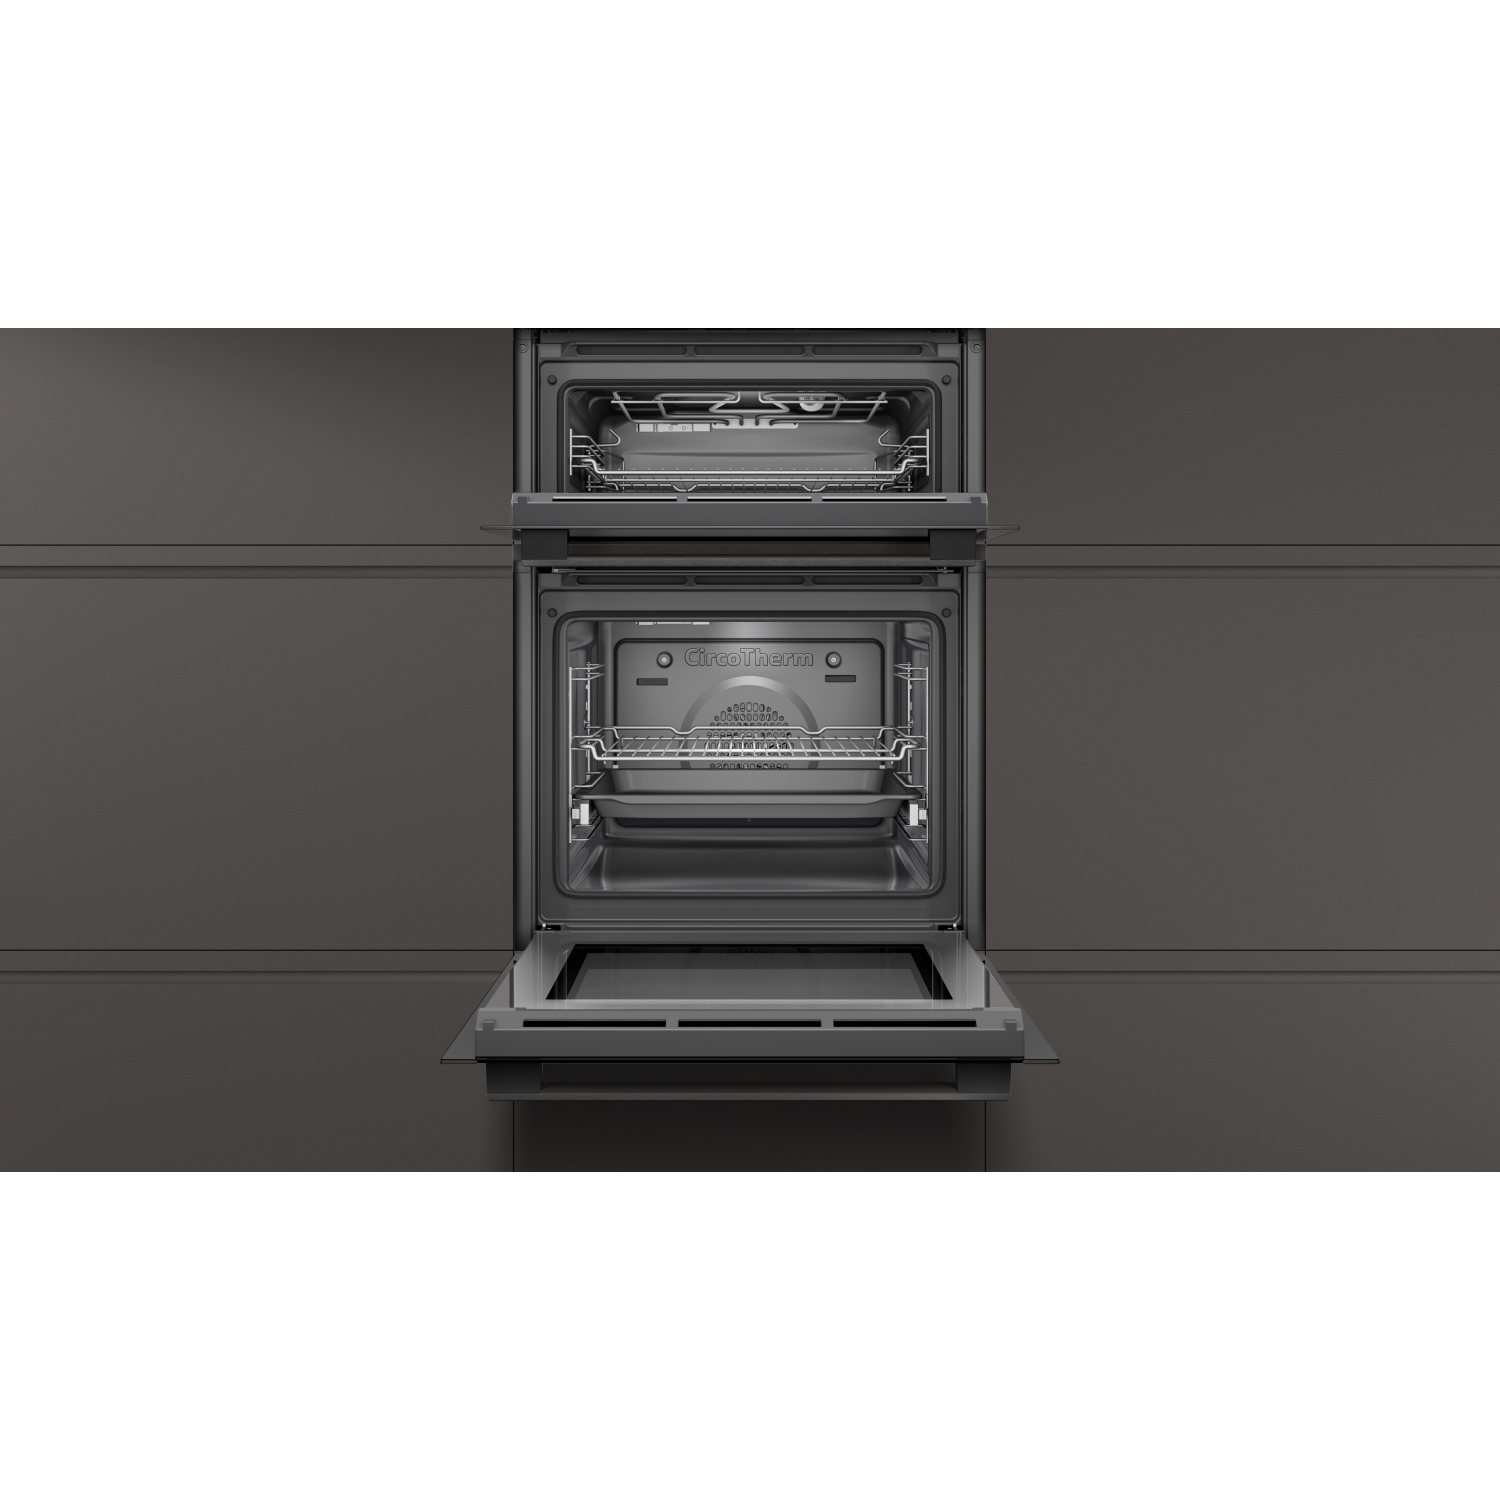 Neff U1ACE2HG0B 59.4cm Built In Electric Double Oven - Black with Graphite Trim - 3